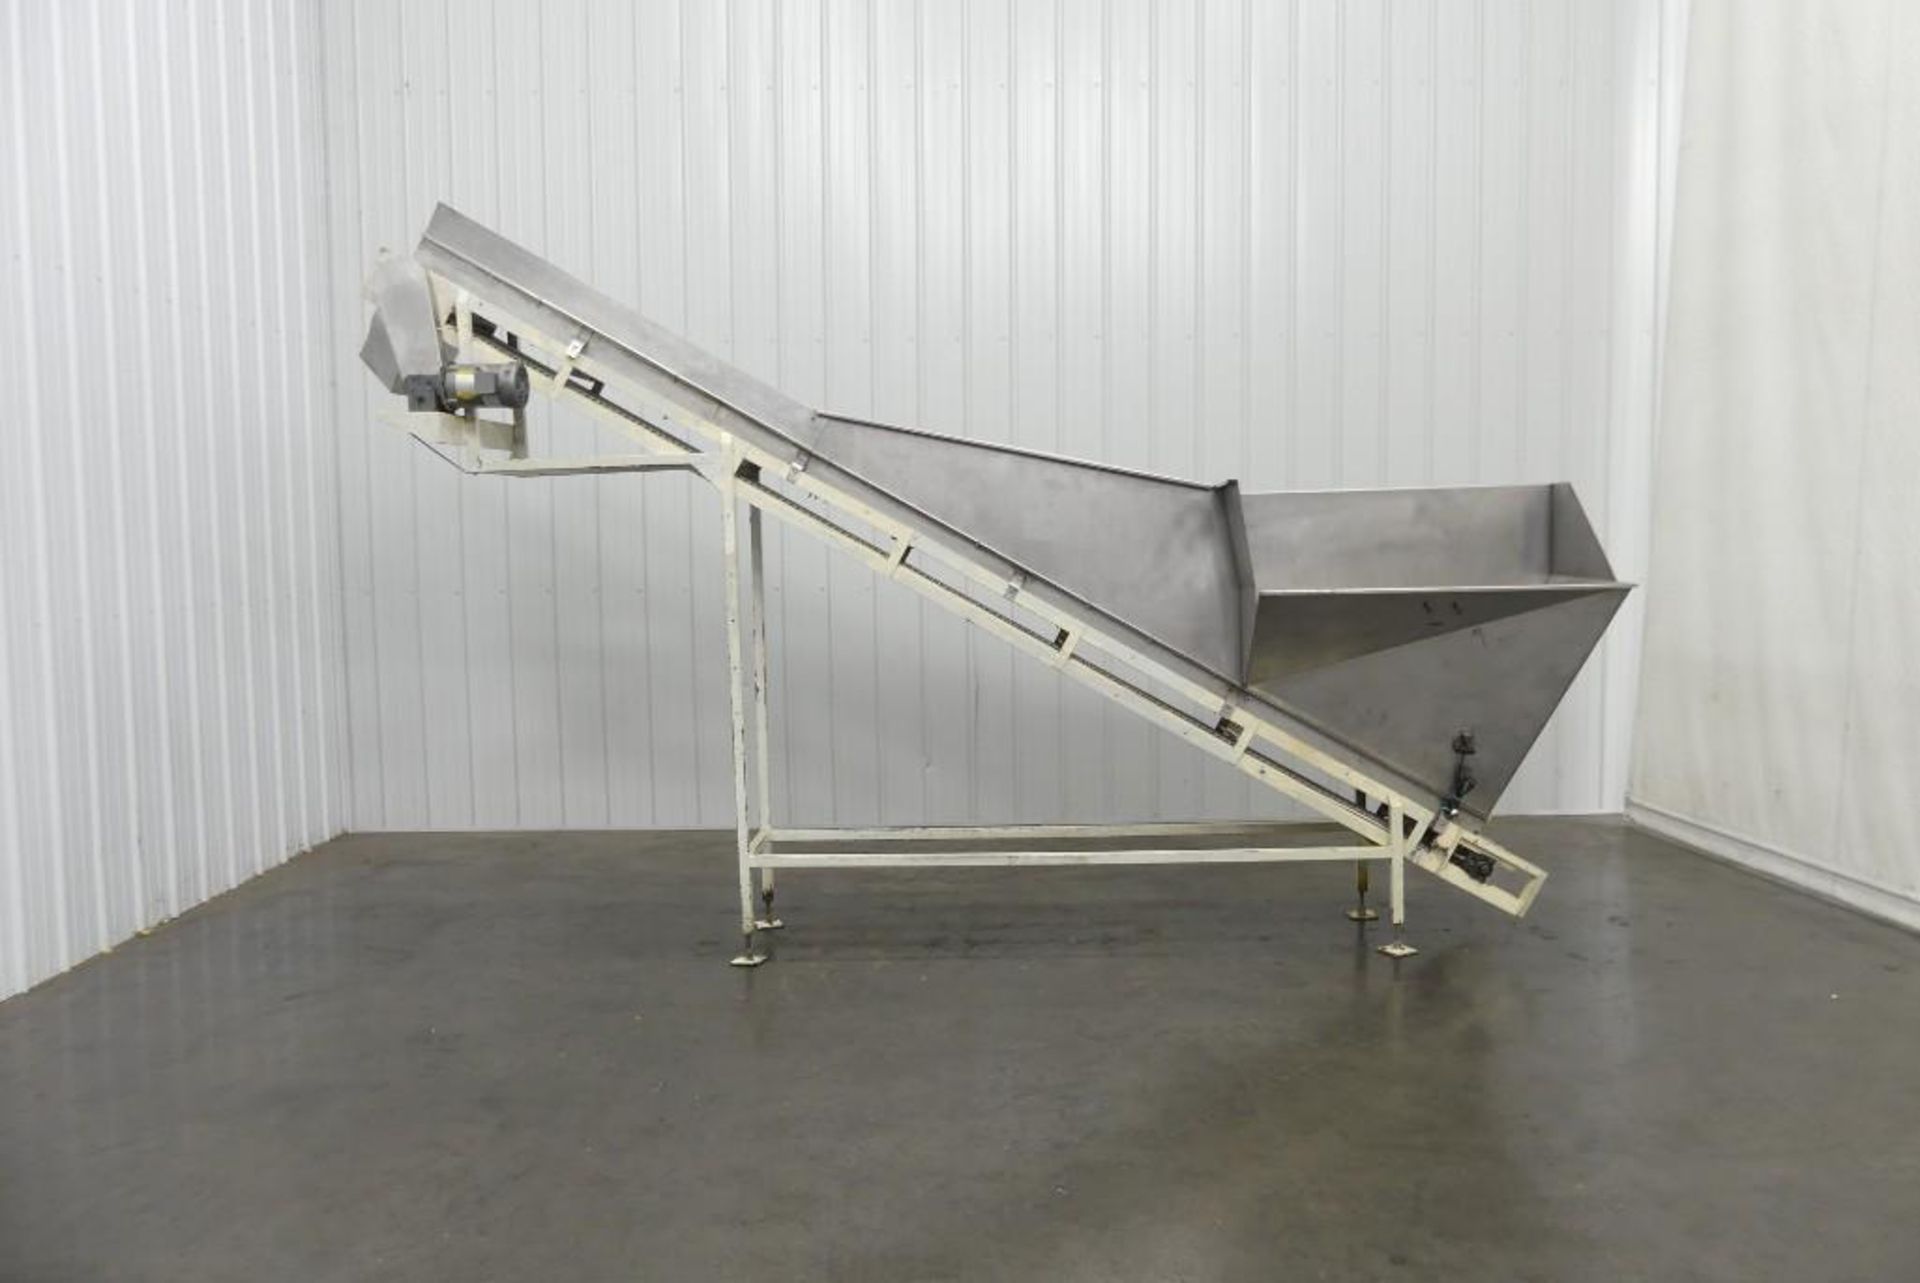 Cleated Incline Conveyor with Hopper 16" Wide - Image 3 of 12